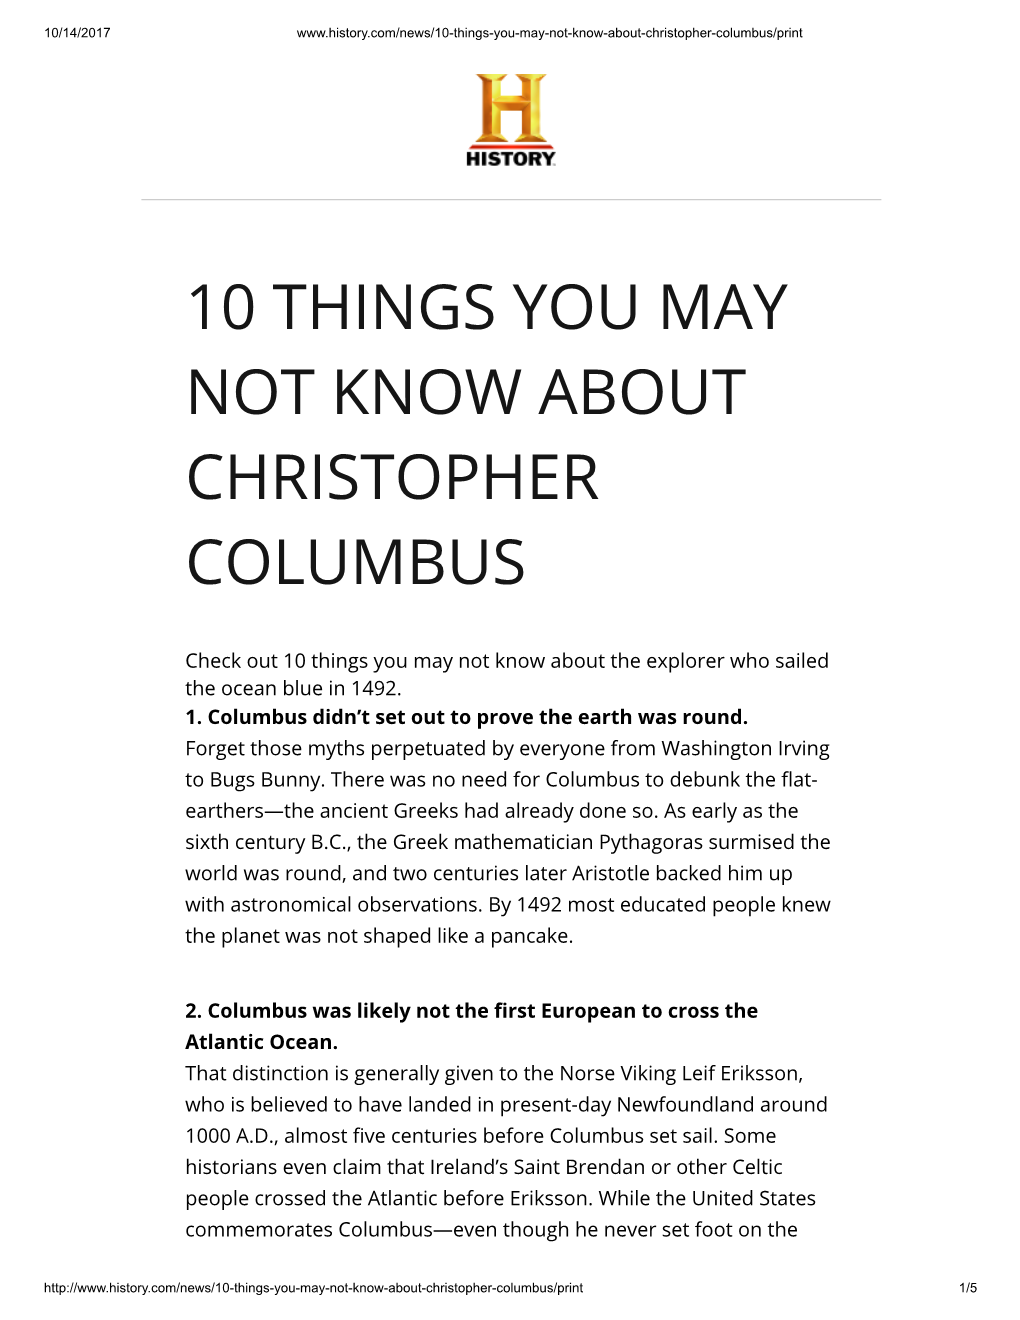 10 Things You May Not Know About Christopher Columbus